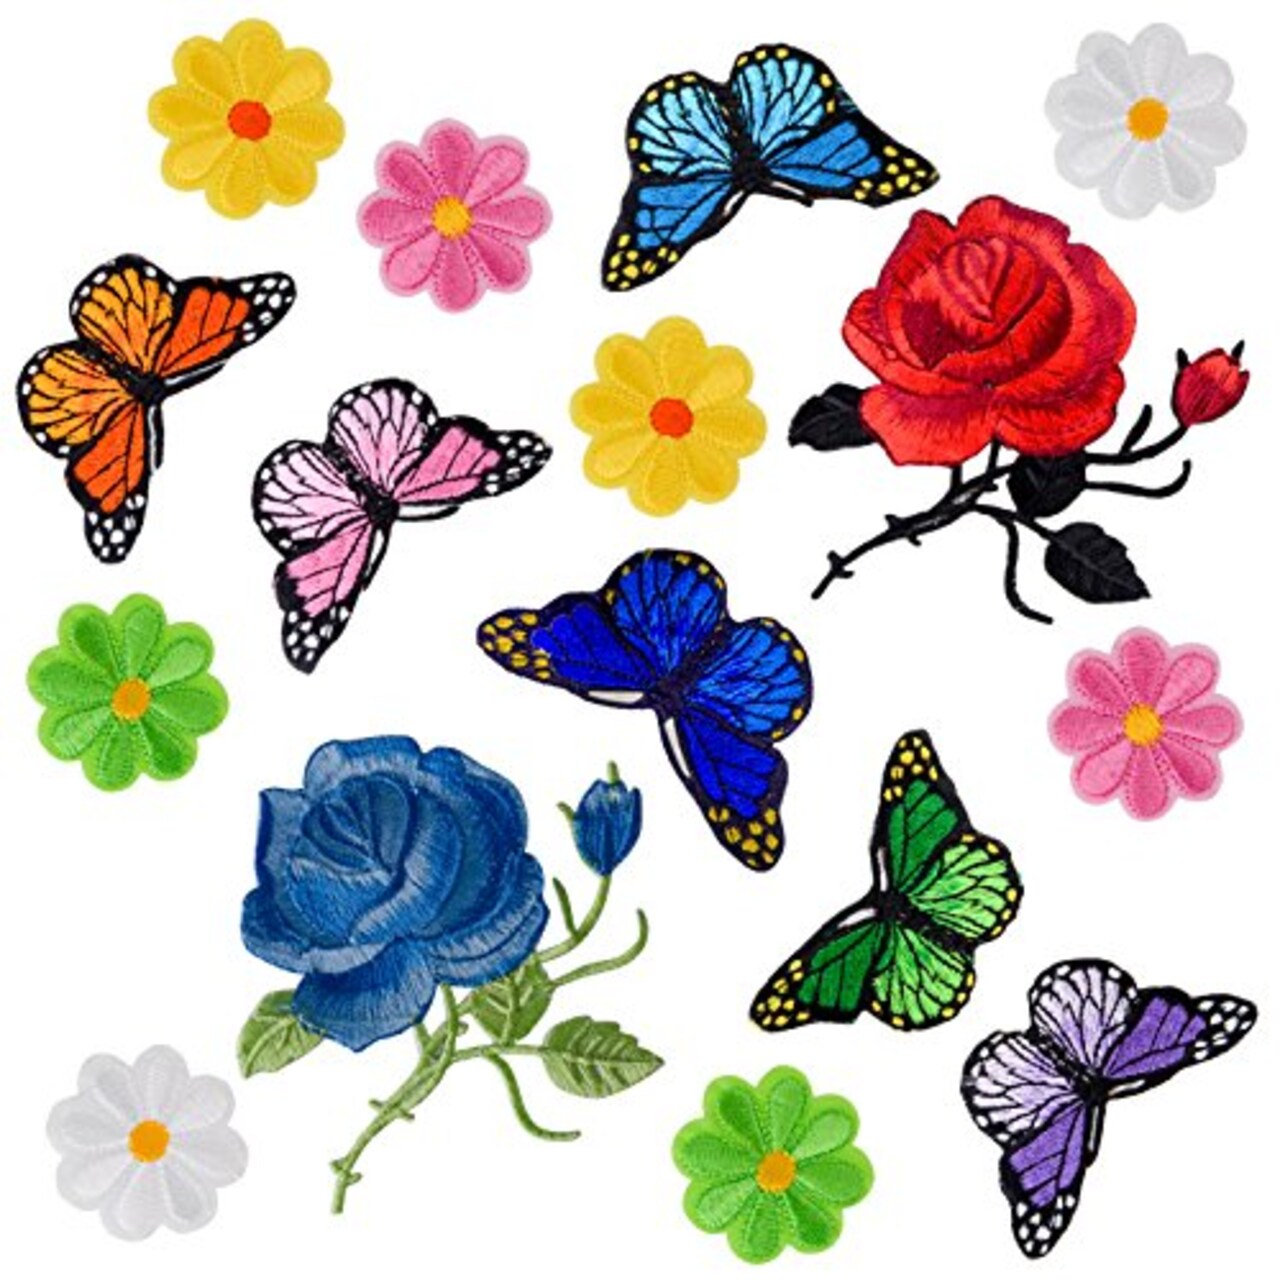 Coopay 16 Pieces Flowers Butterfly Sunflowers Iron on/Sew on Patches Rose  Embroidery Applique Patches for Arts Crafts DIY Decor, Jeans, Jackets,  Clothing, Bags